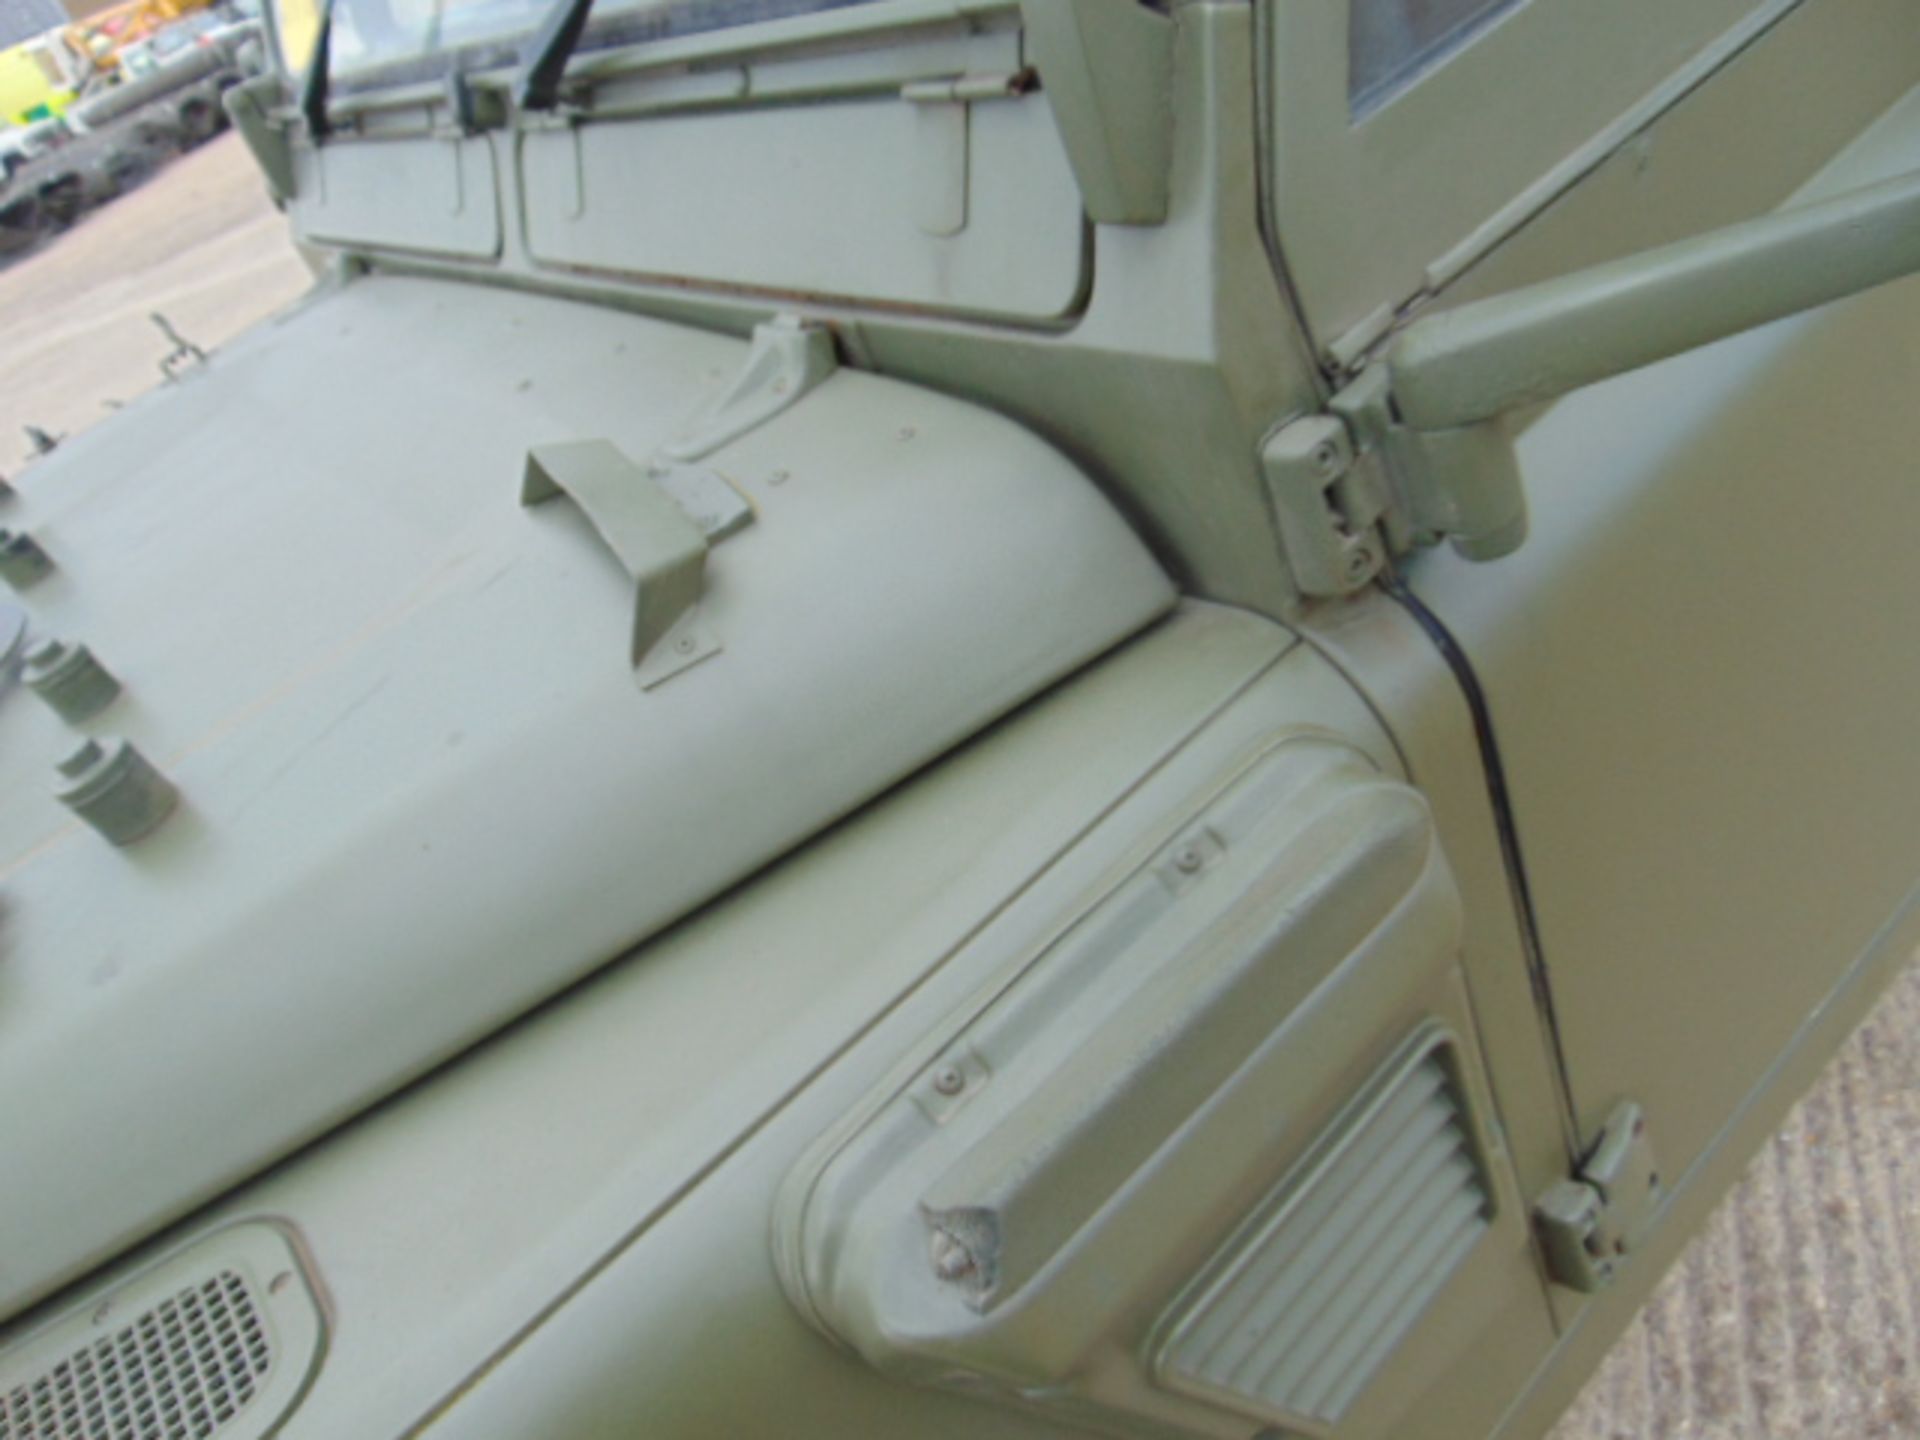 Military Specification Land Rover Wolf 90 Hard Top - Image 18 of 22